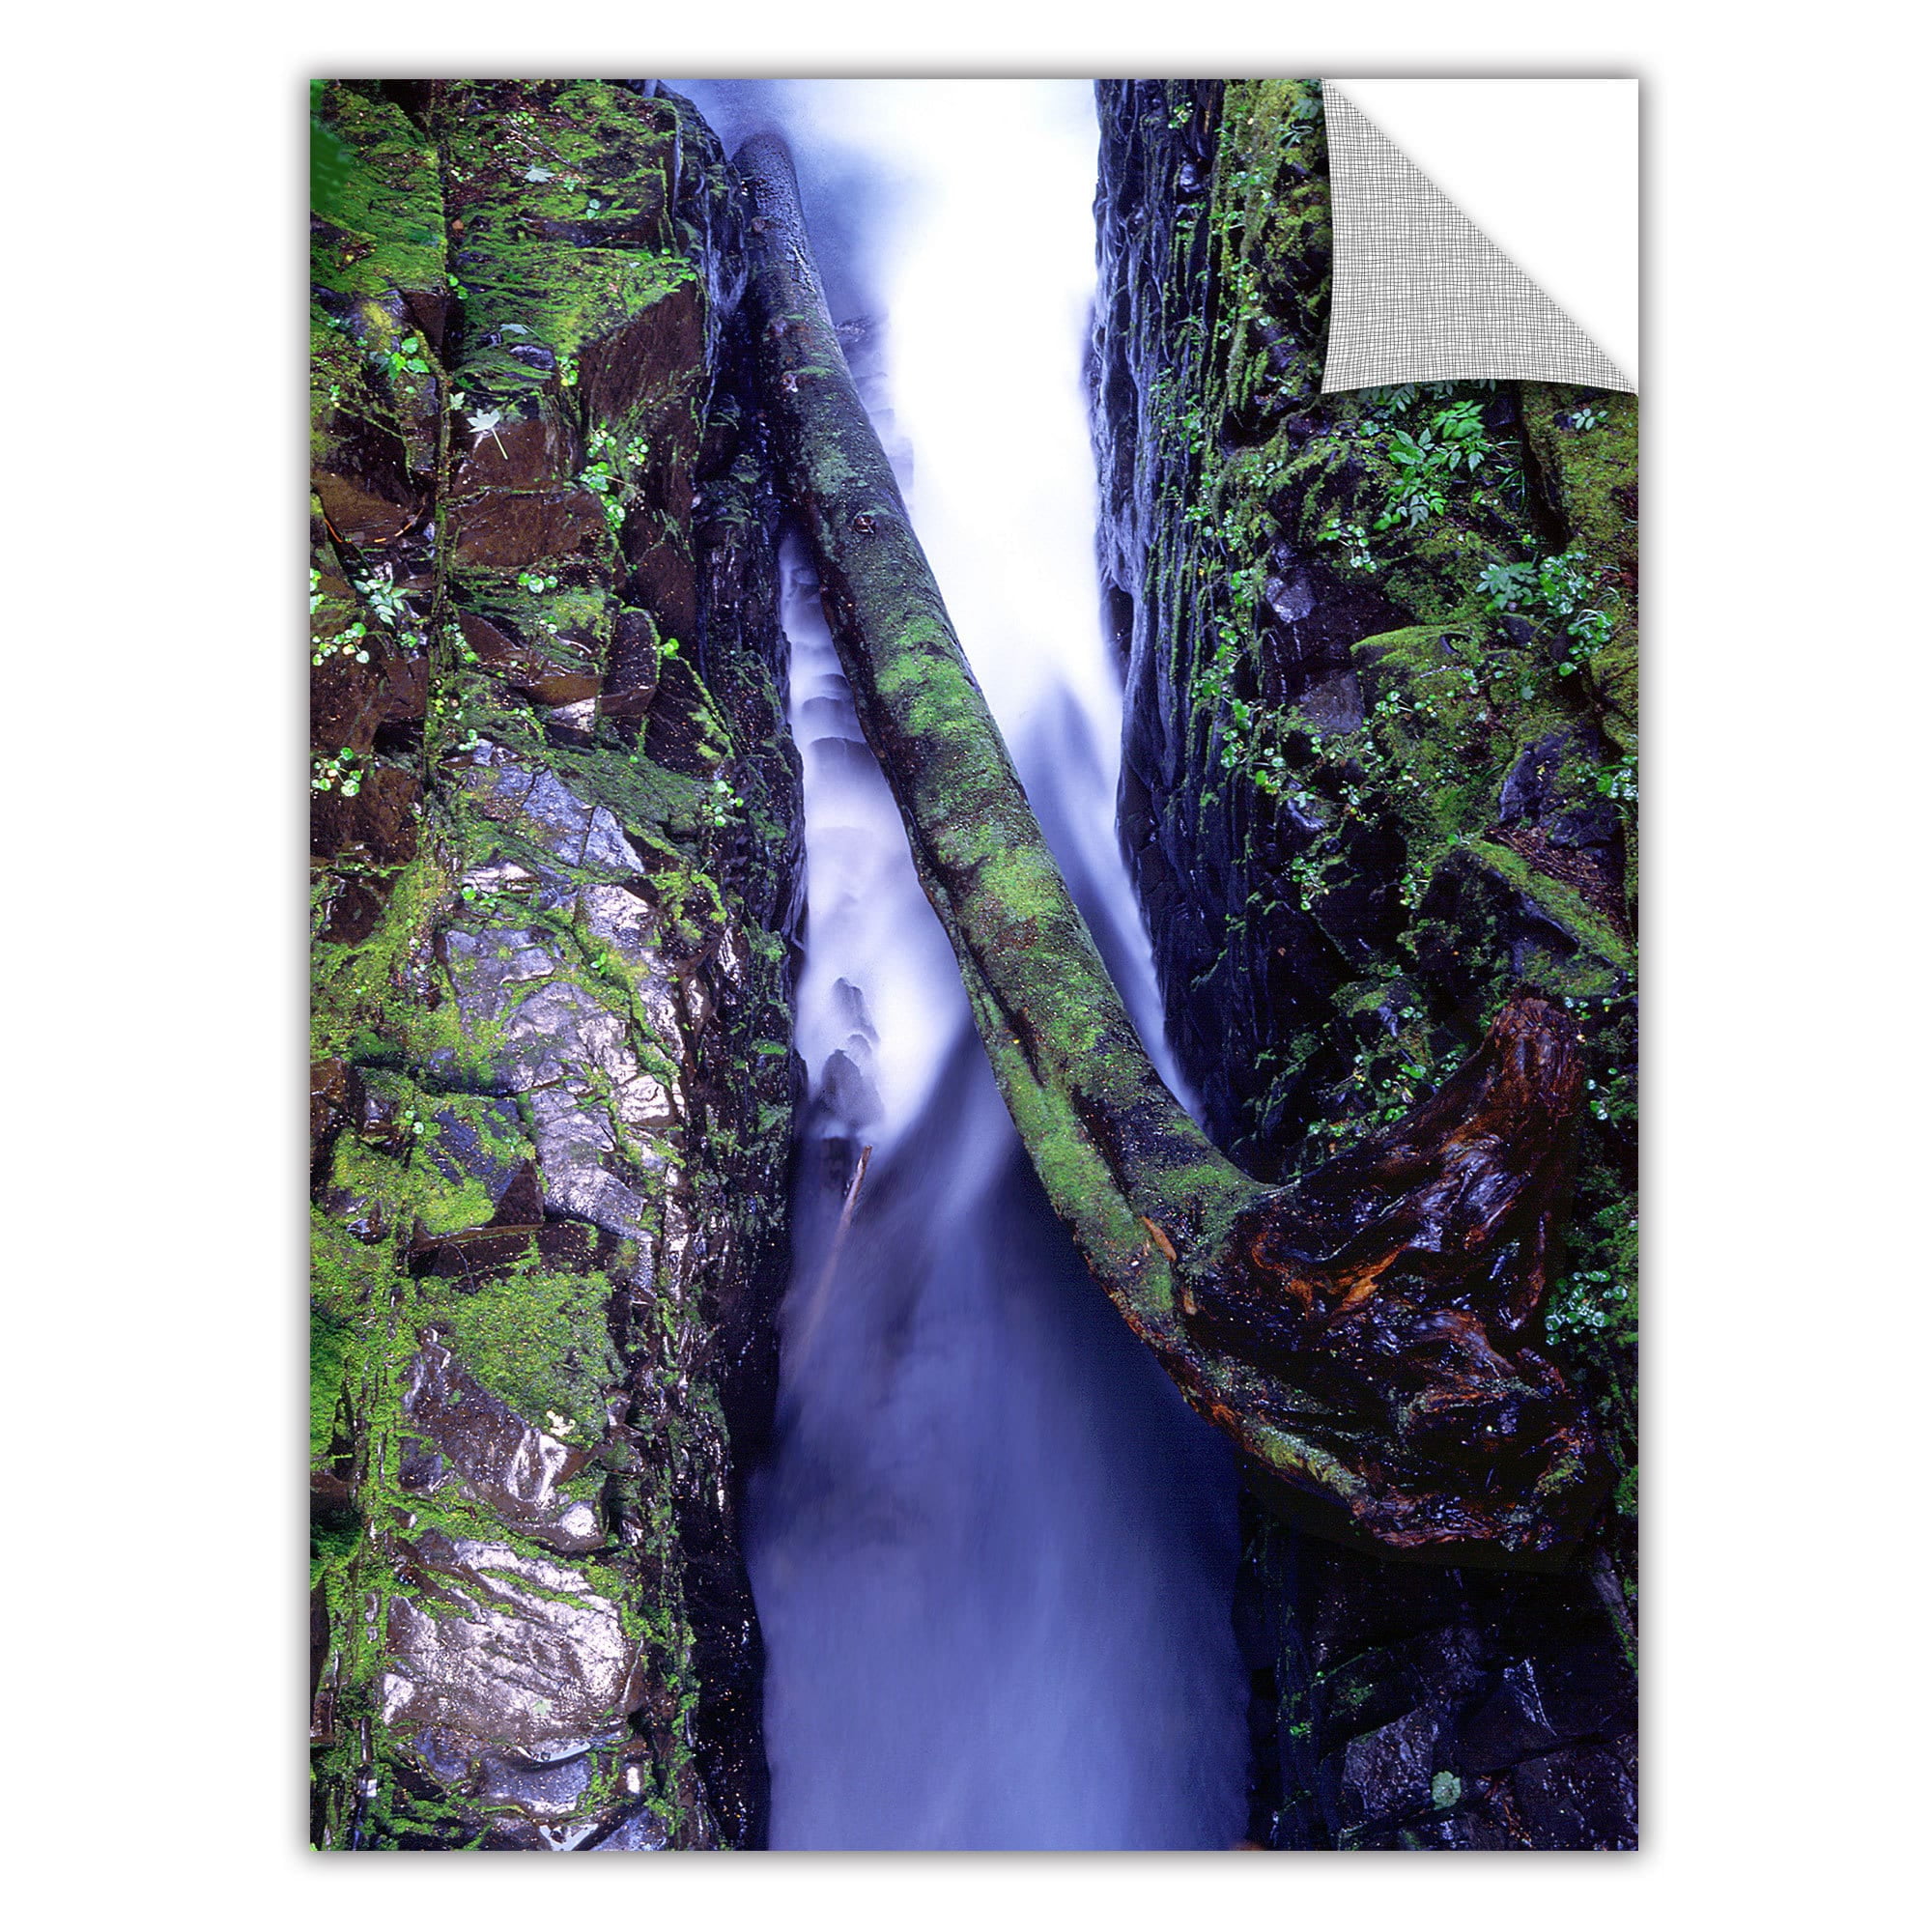 ArtWall ArtApeelz Sol Duc River Slot Removable Graphic Wall Art by Dean Uhlinger 18 by 24-Inch 